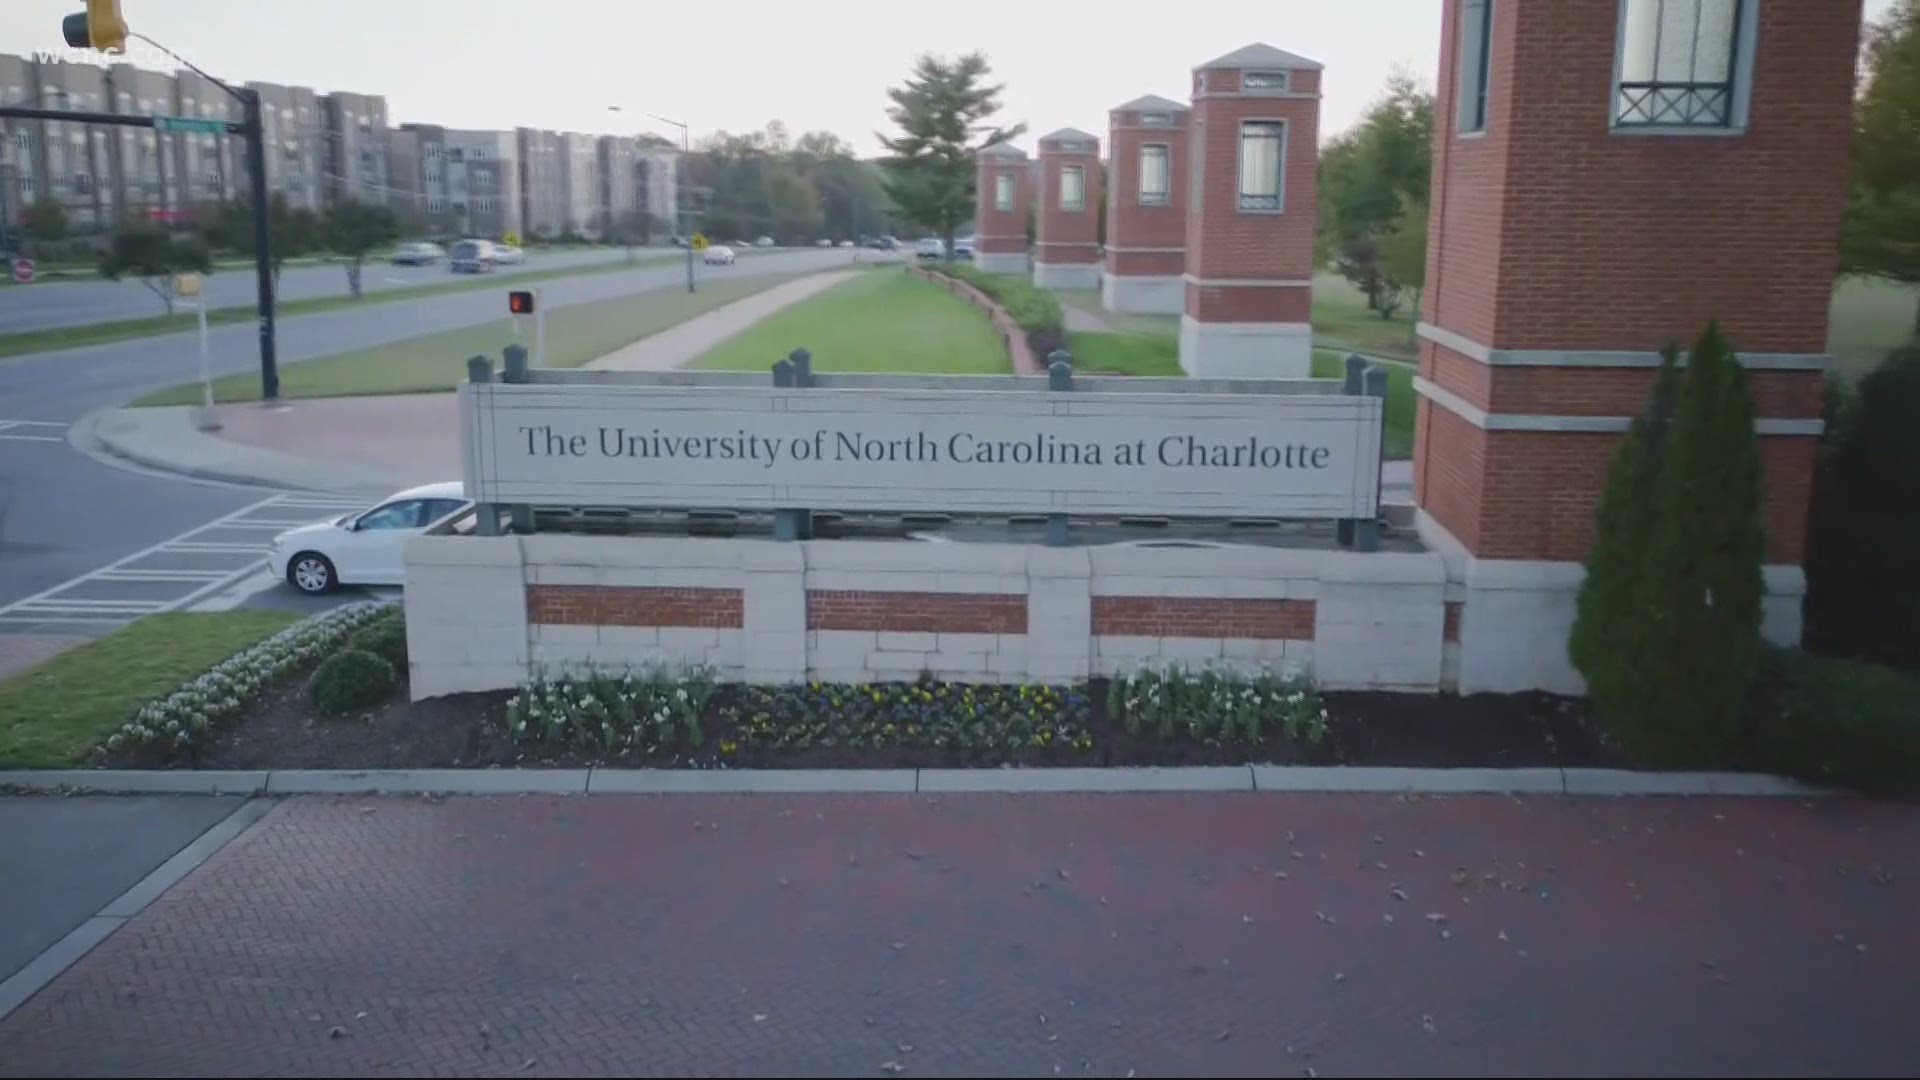 Students and faculty at UNC Charlotte will return to the classroom Monday as the university resumes in-person instruction with strict protective measures.